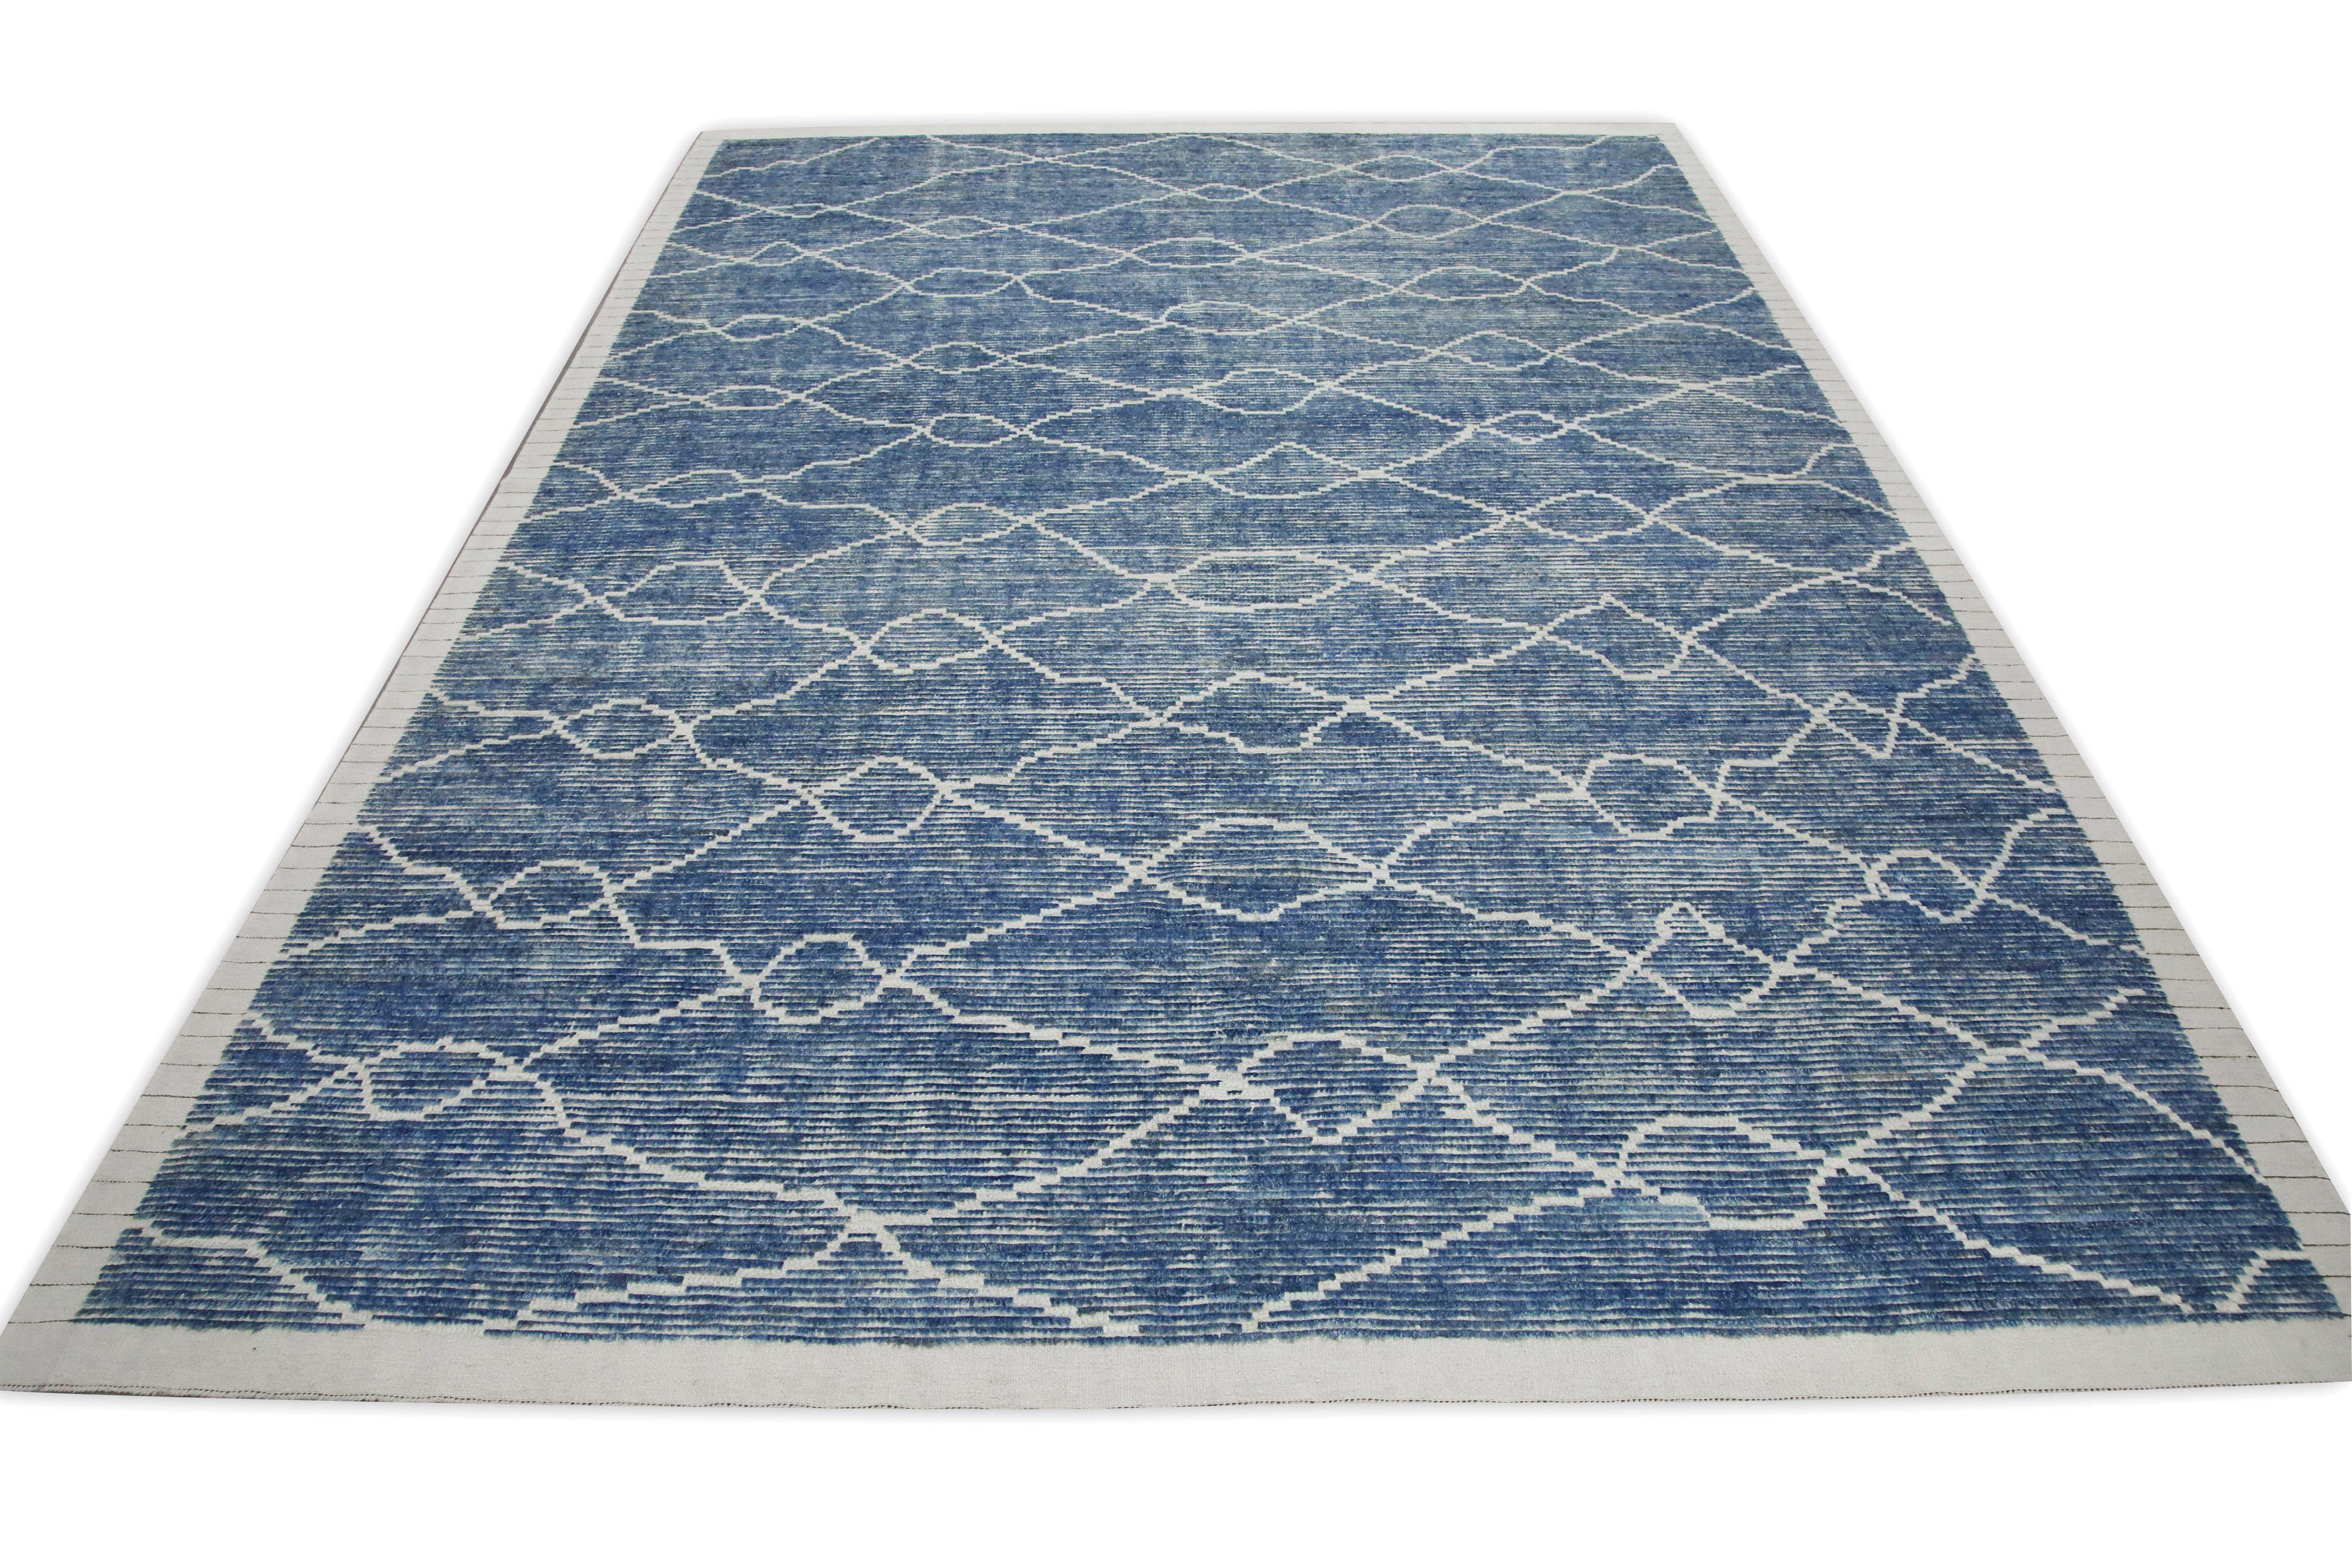 Contemporary 21st Century Modern Moroccan Style Wool Rug in Blue Design 9'5